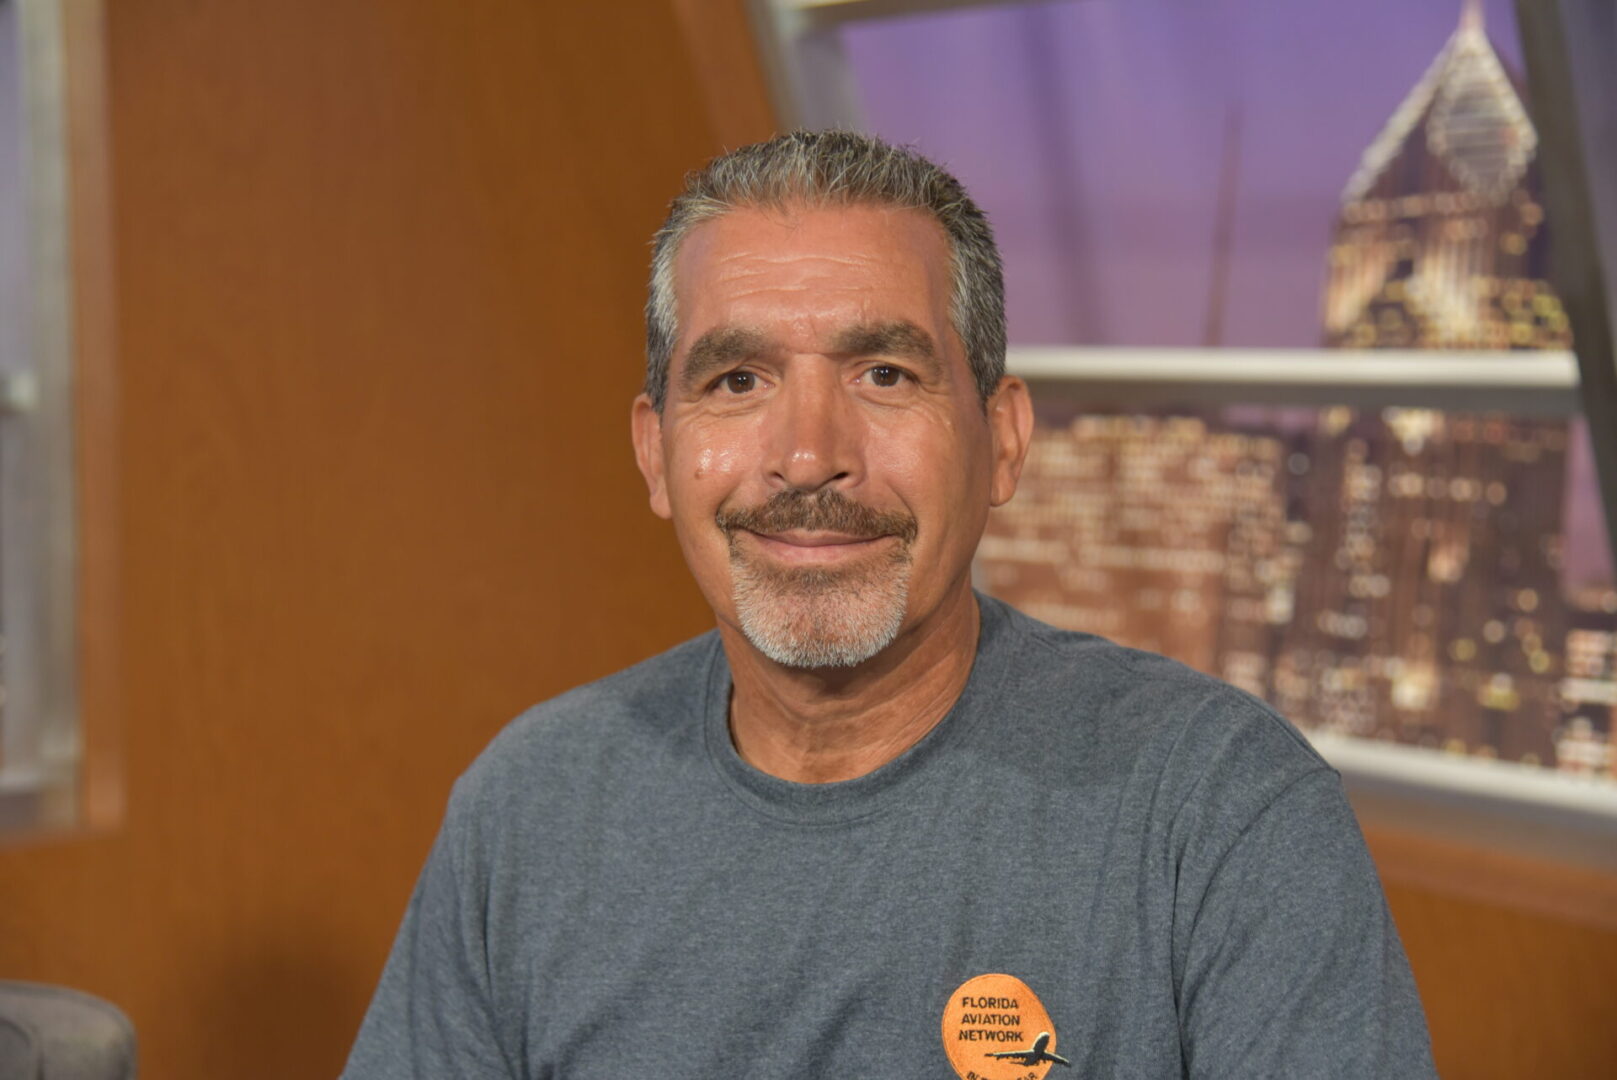 A man with grey hair and mustache wearing a blue shirt.